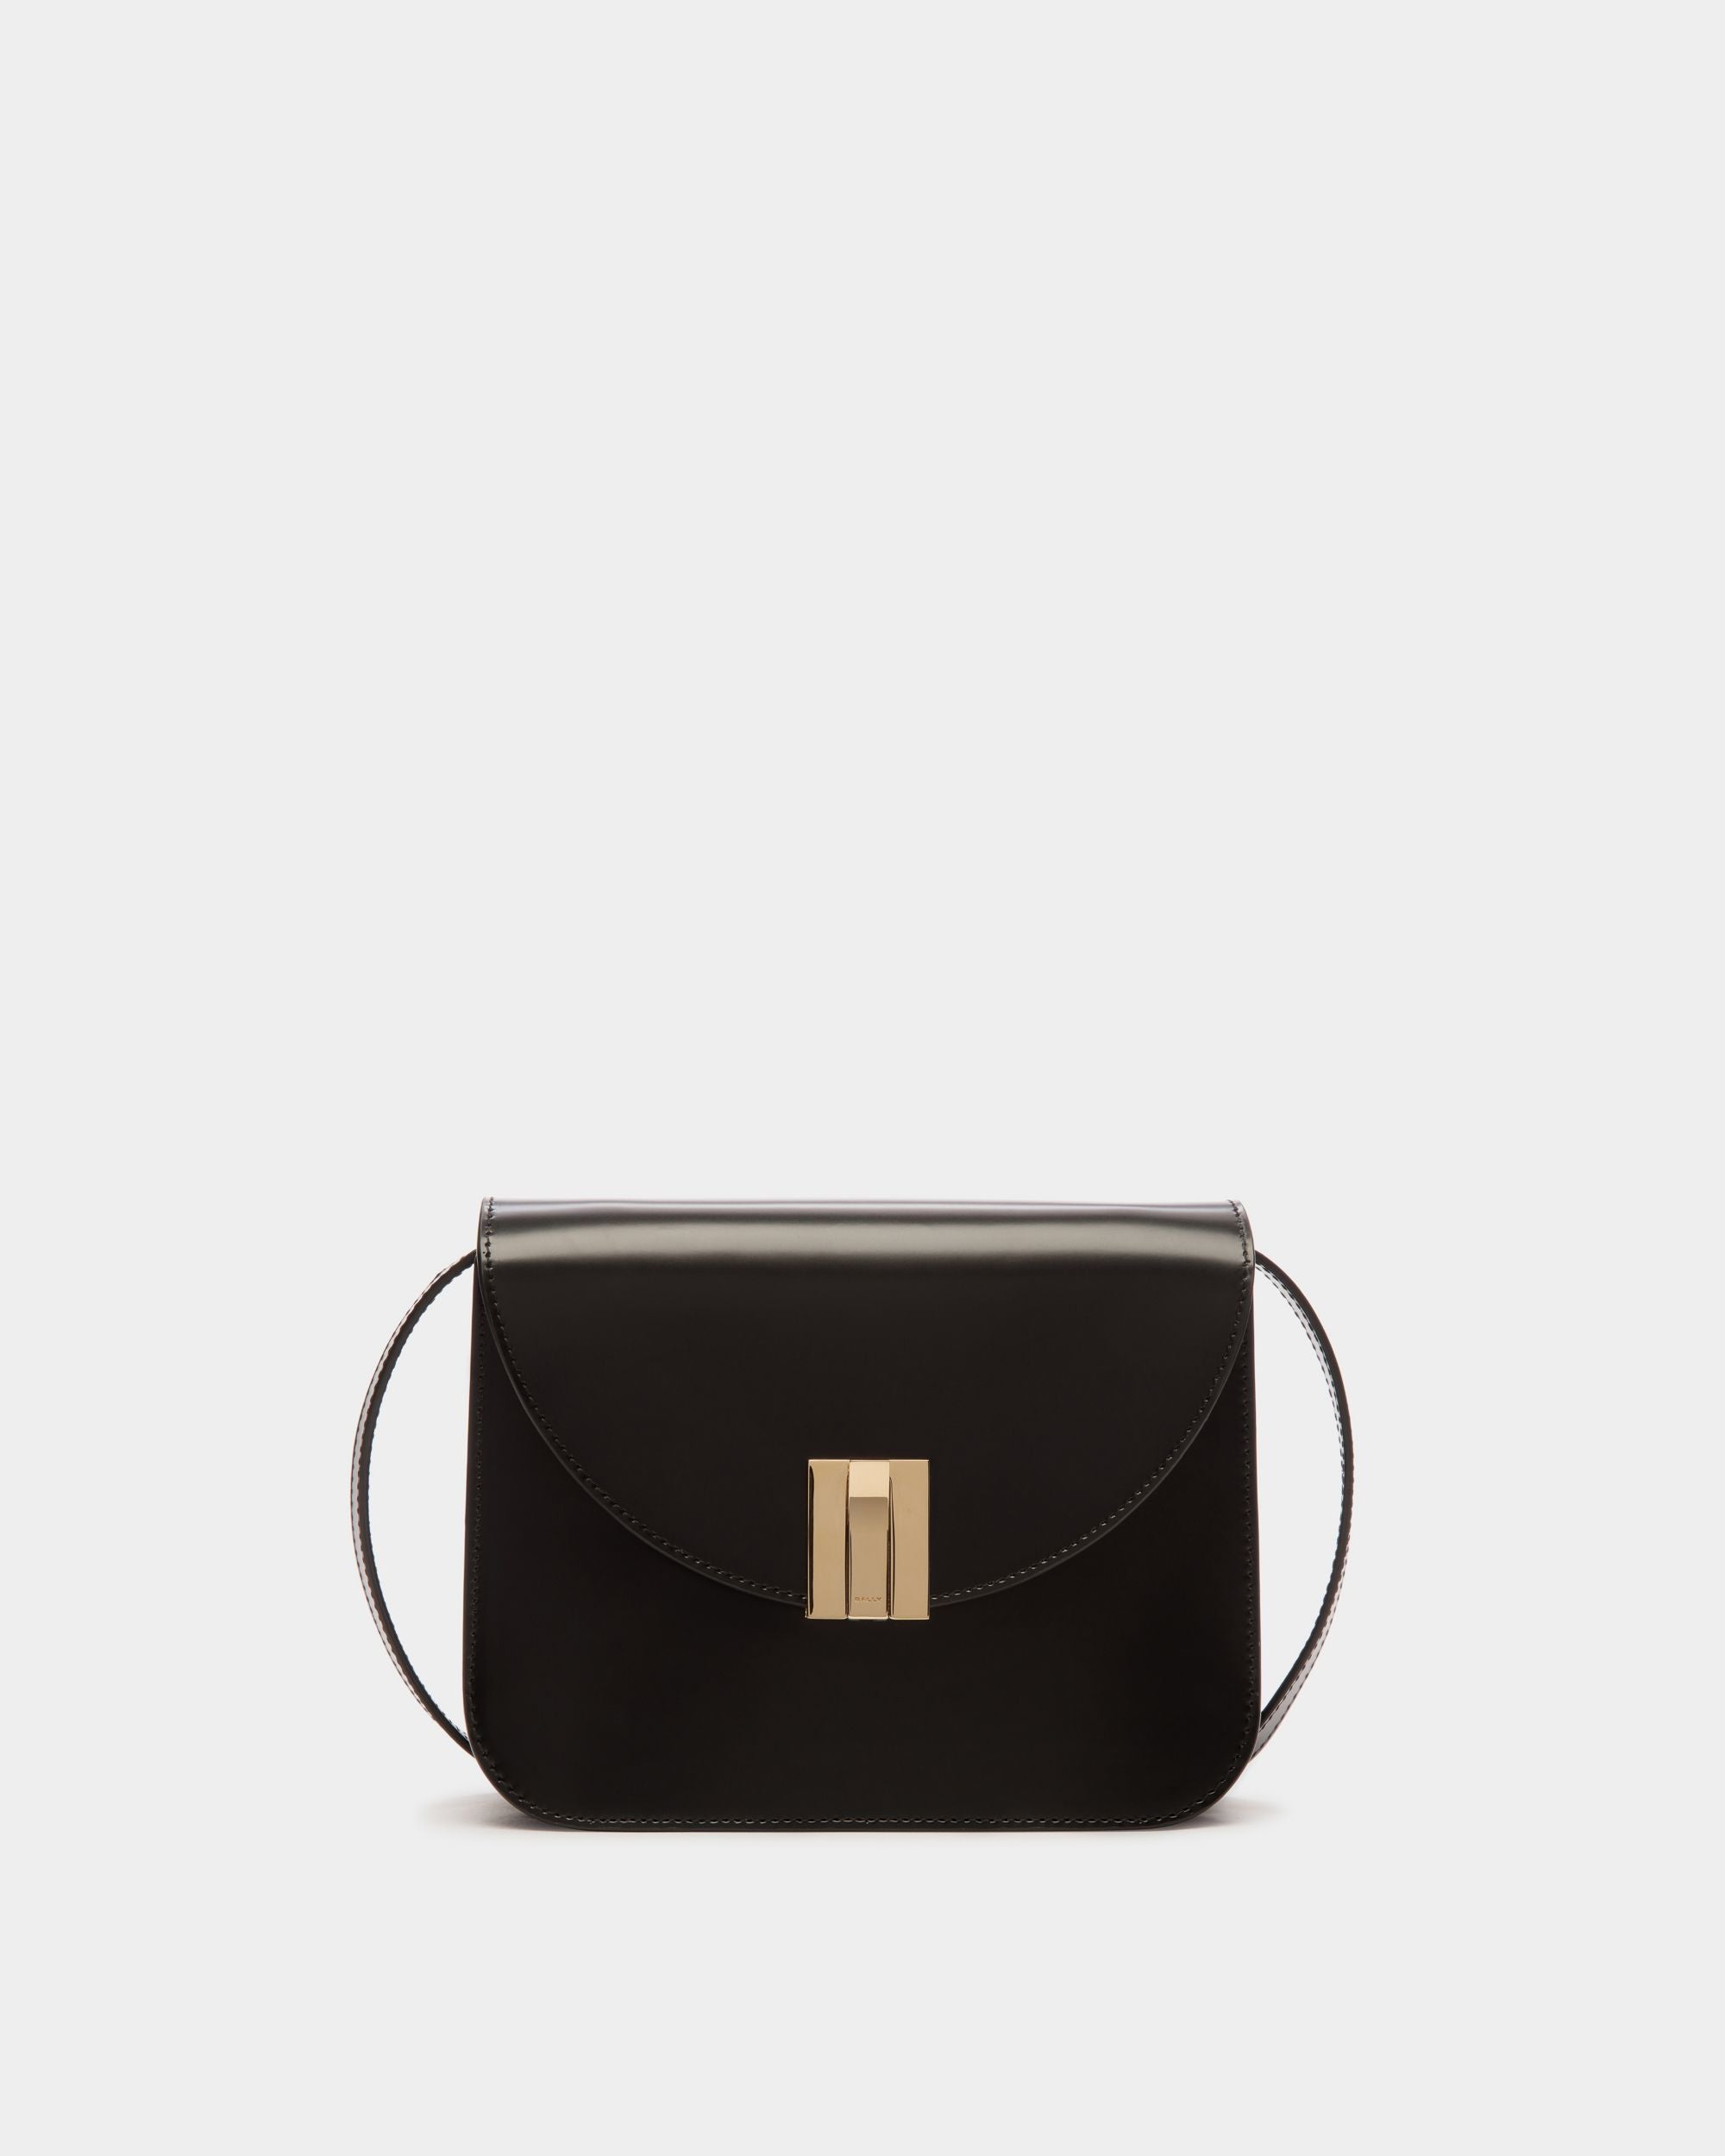 Ollam | Women's Crossbody Bag in Black Brushed Leather | Bally | Still Life Front